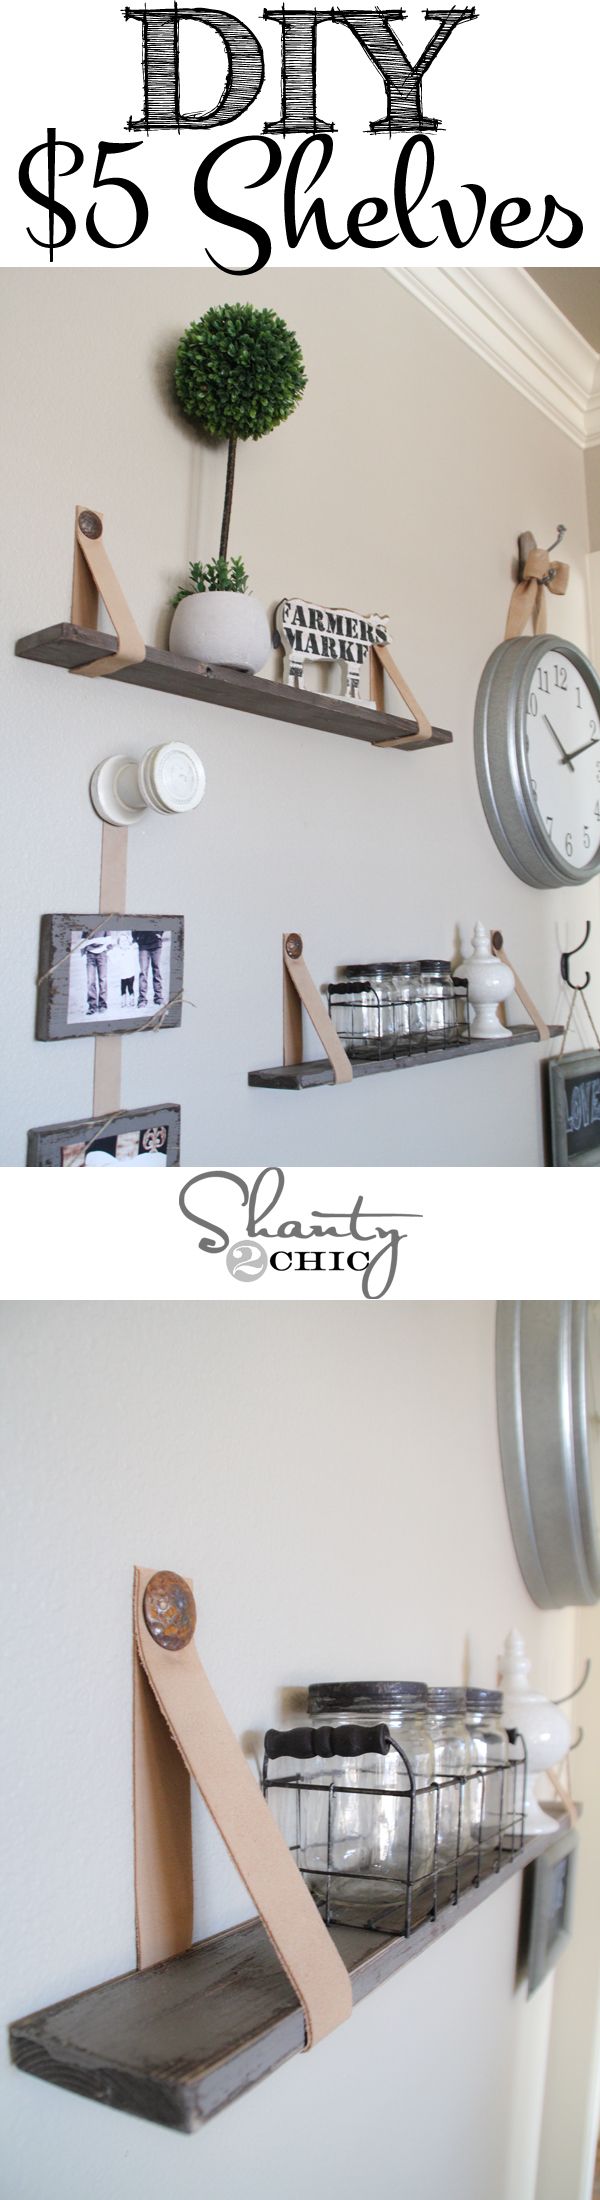 Easy $5 shelves with leather straps! This is so cool! Love!